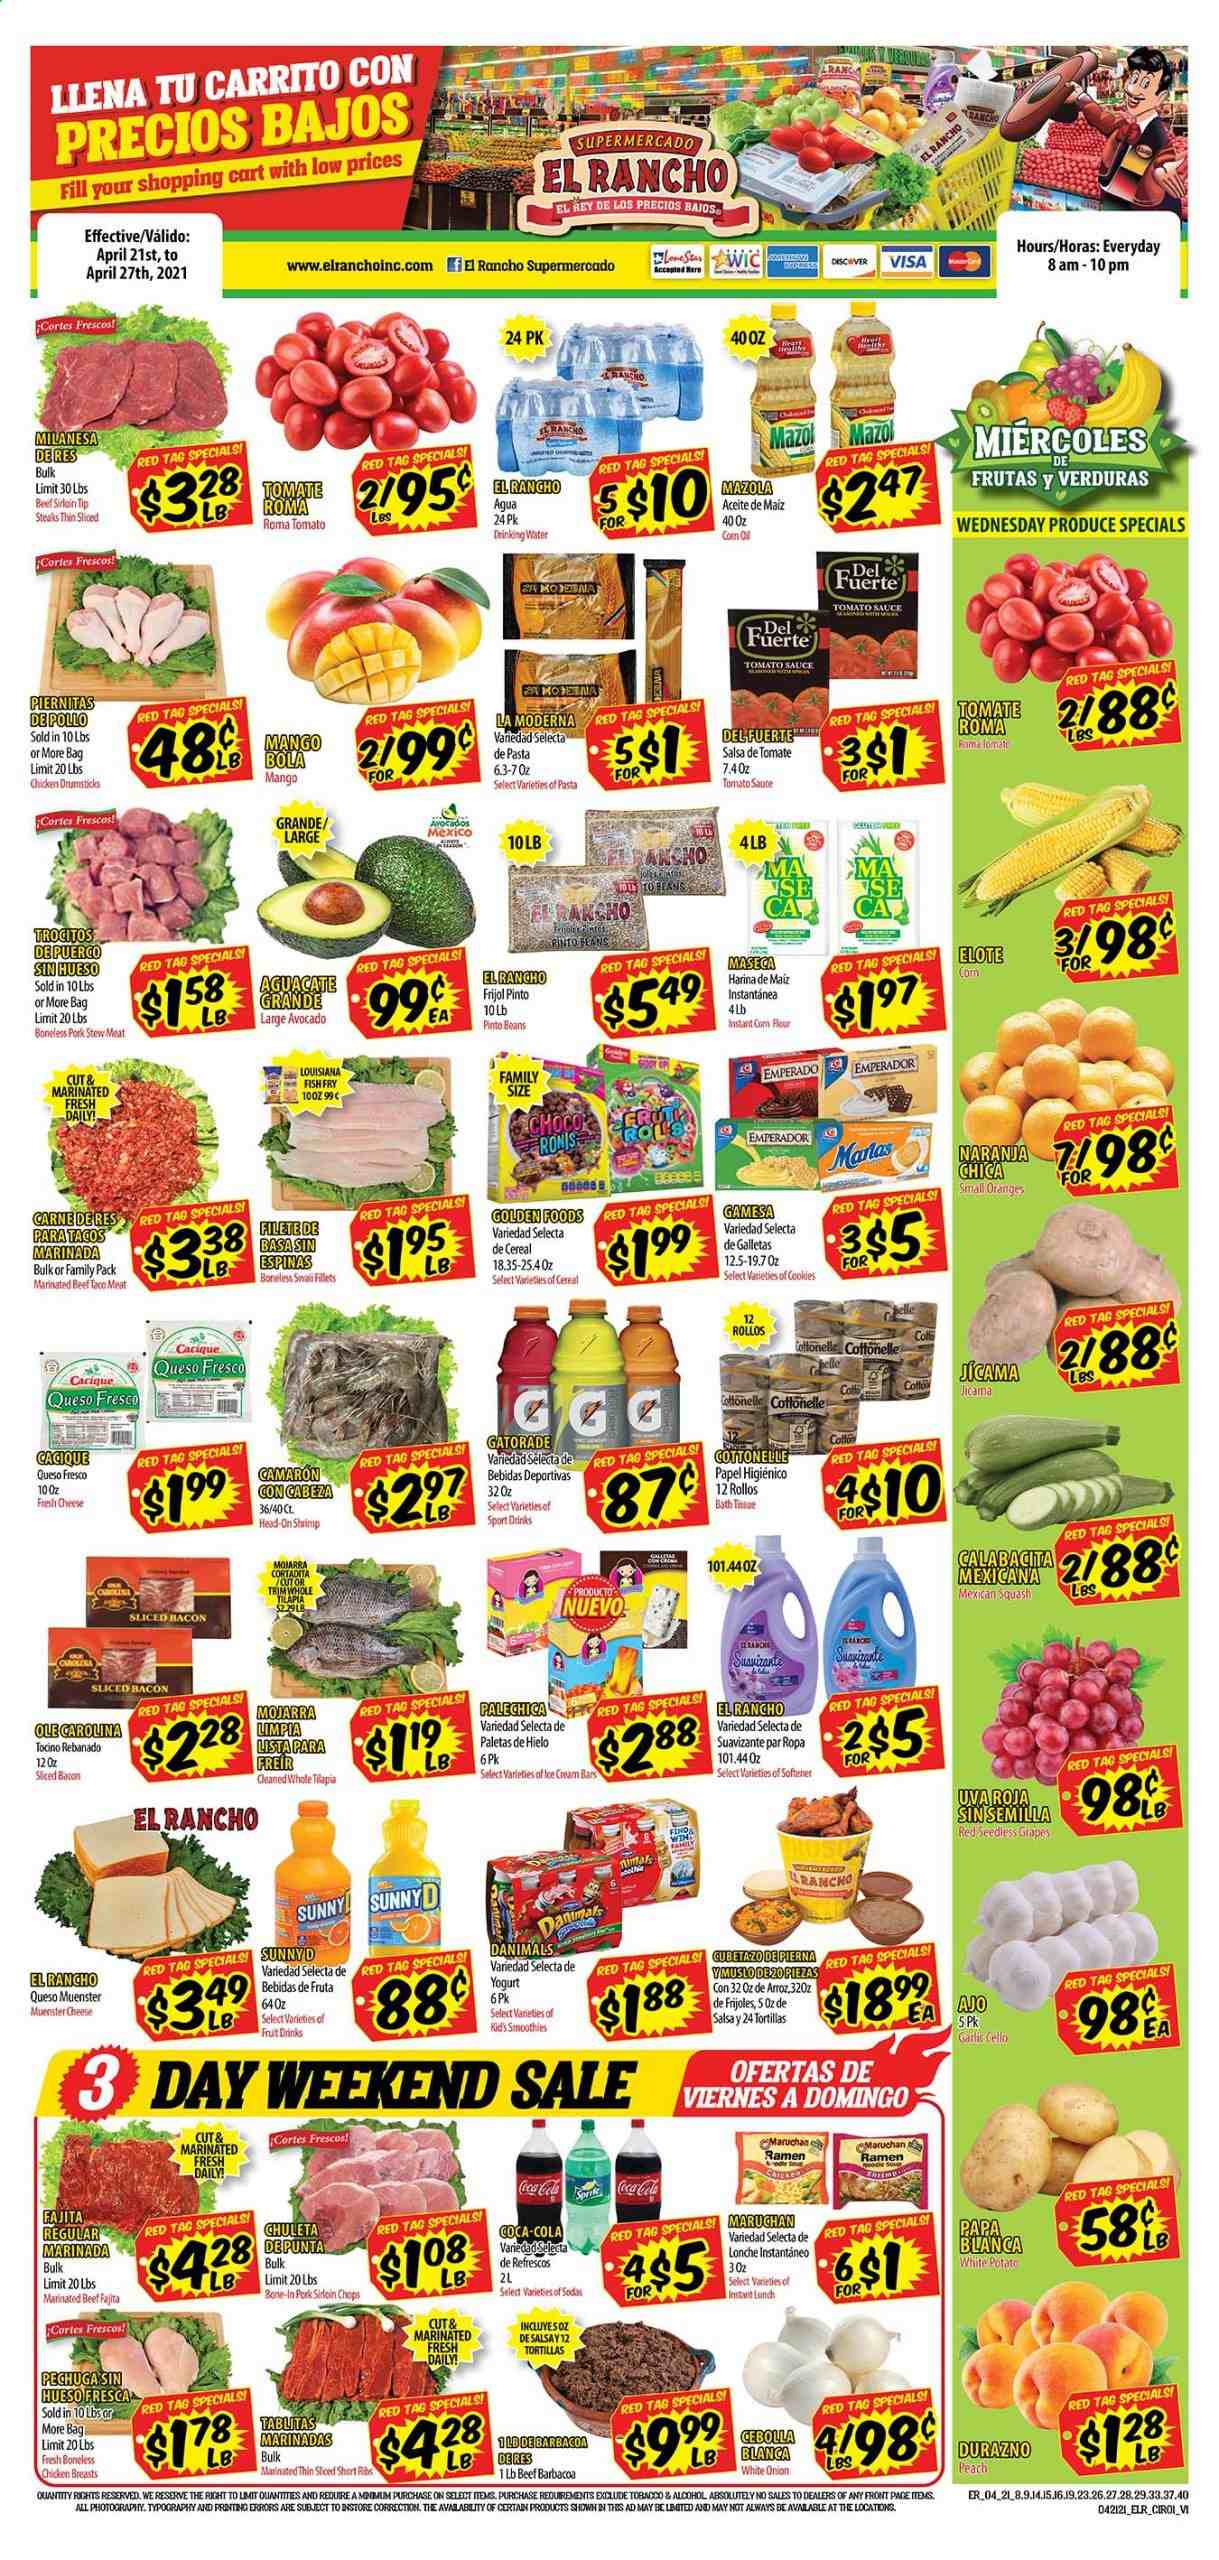 thumbnail - El Rancho Flyer - 04/21/2021 - 04/27/2021 - Sales products - stew meat, jicama, seedless grapes, tortillas, beans, corn, garlic, tomatoes, mexican squash, avocado, grapes, mango, oranges, tilapia, fish, shrimps, fried fish, ramen, pasta, sauce, fajita, bacon, queso fresco, cheese, Münster cheese, yoghurt, Danimals, ice cream, ice cream bars, cookies, flour, corn flour, tomato sauce, pinto beans, cereals, salsa, Coca-Cola, Gatorade, smoothie, alcohol, chicken breasts, chicken drumsticks, beef meat, beef sirloin, steak, marinated beef, pork loin. Page 1.